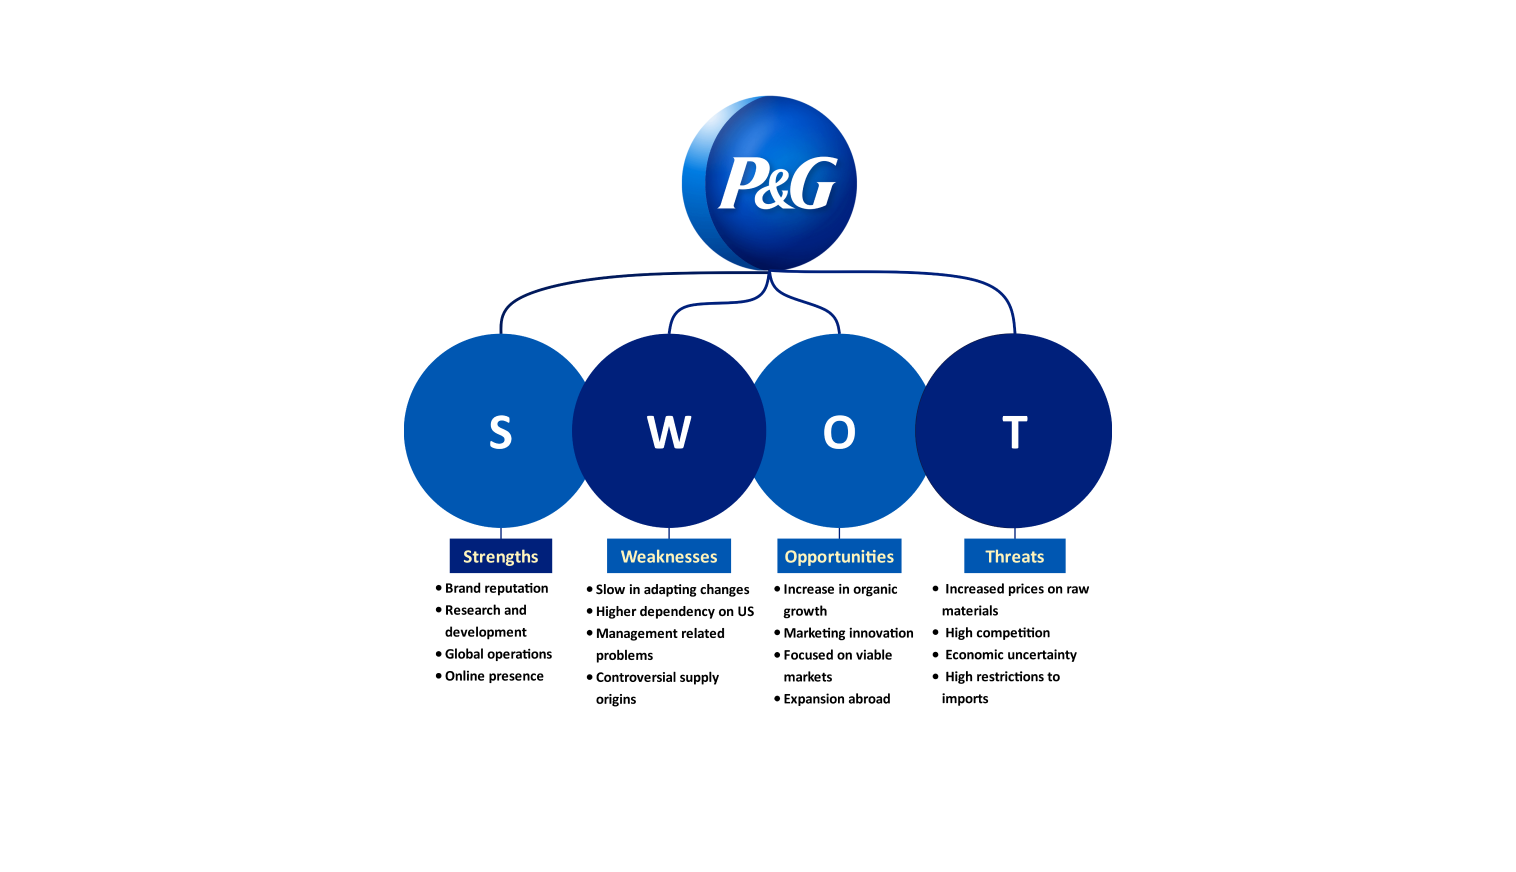 p&g swot analysis template free download